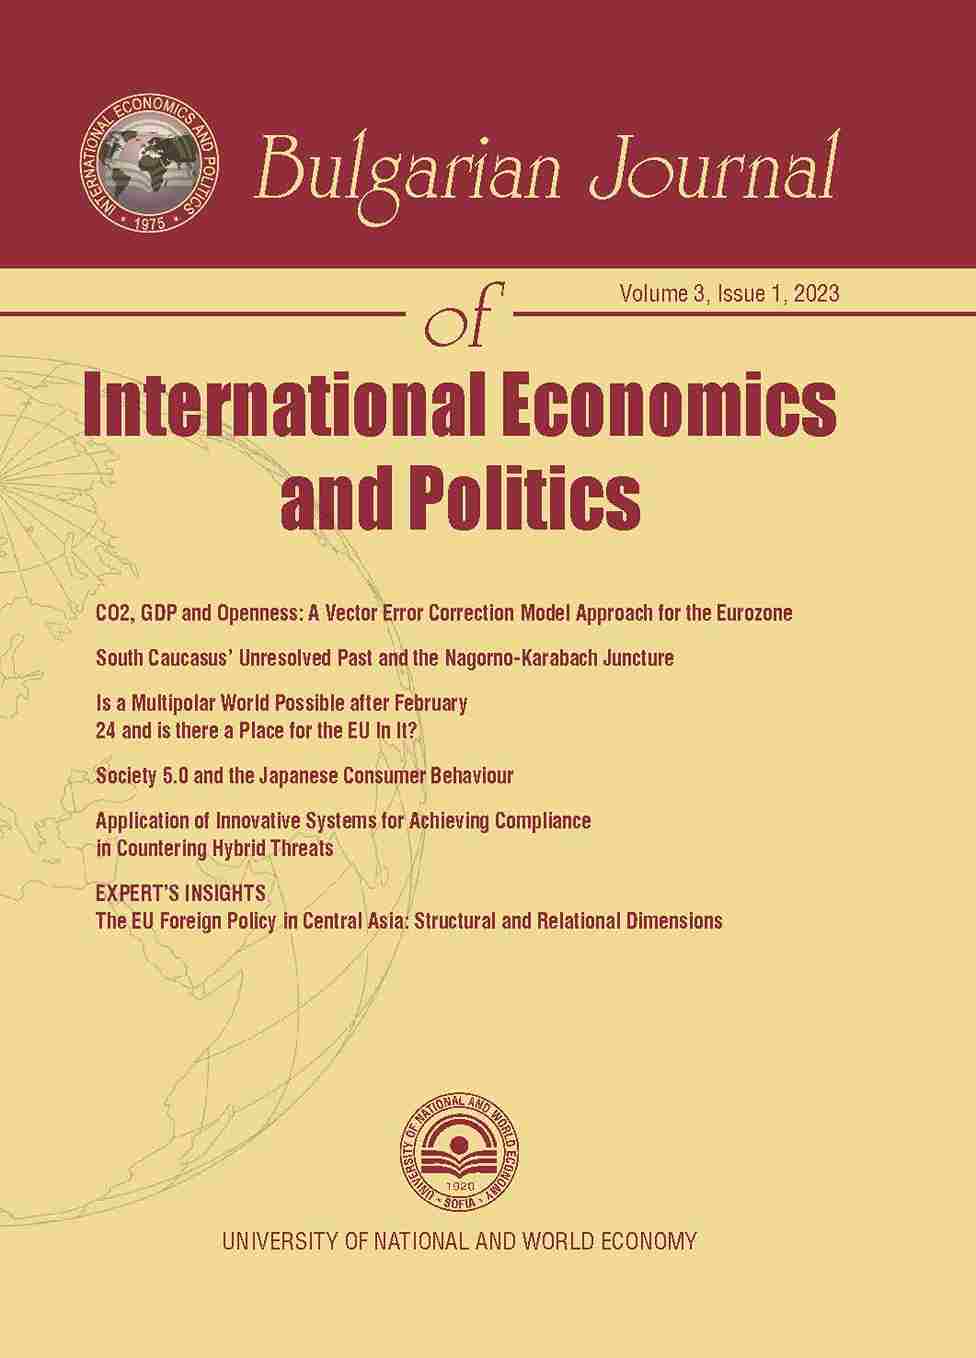 CO2, GDP and Openness: A Vector Error Correction Model Approach for the Eurozone Cover Image